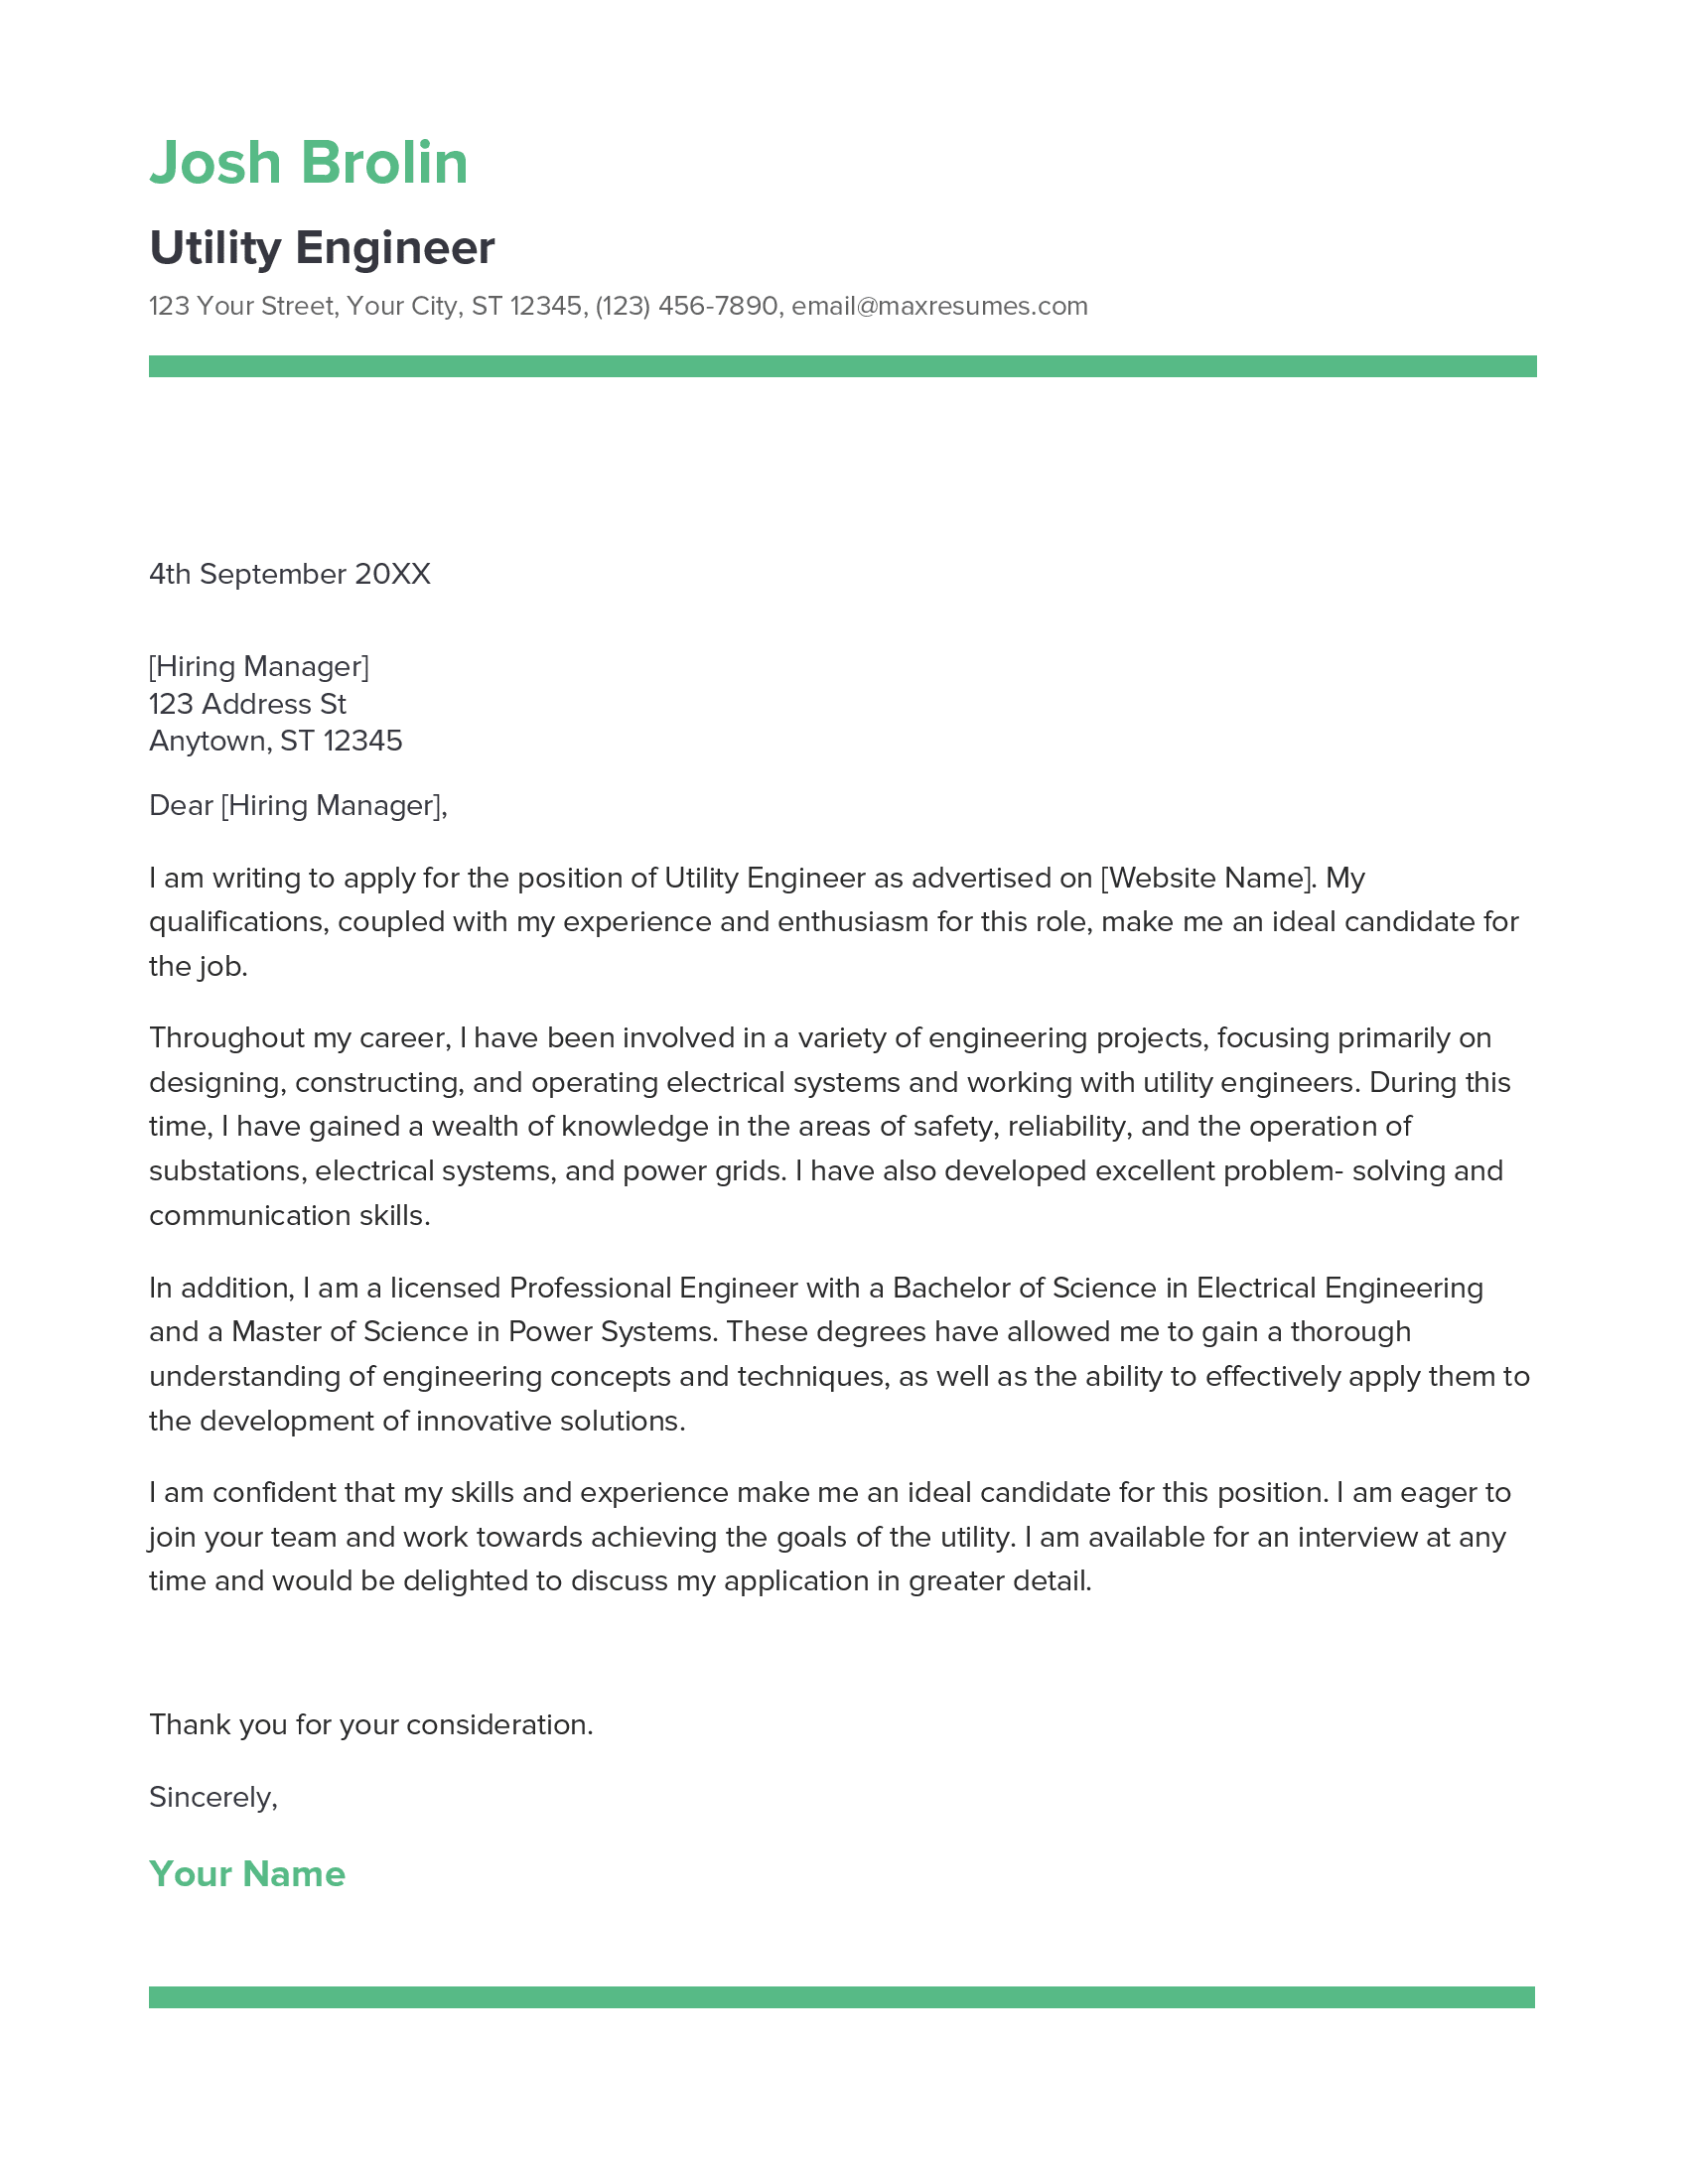 Utility Engineer Cover Letter Example